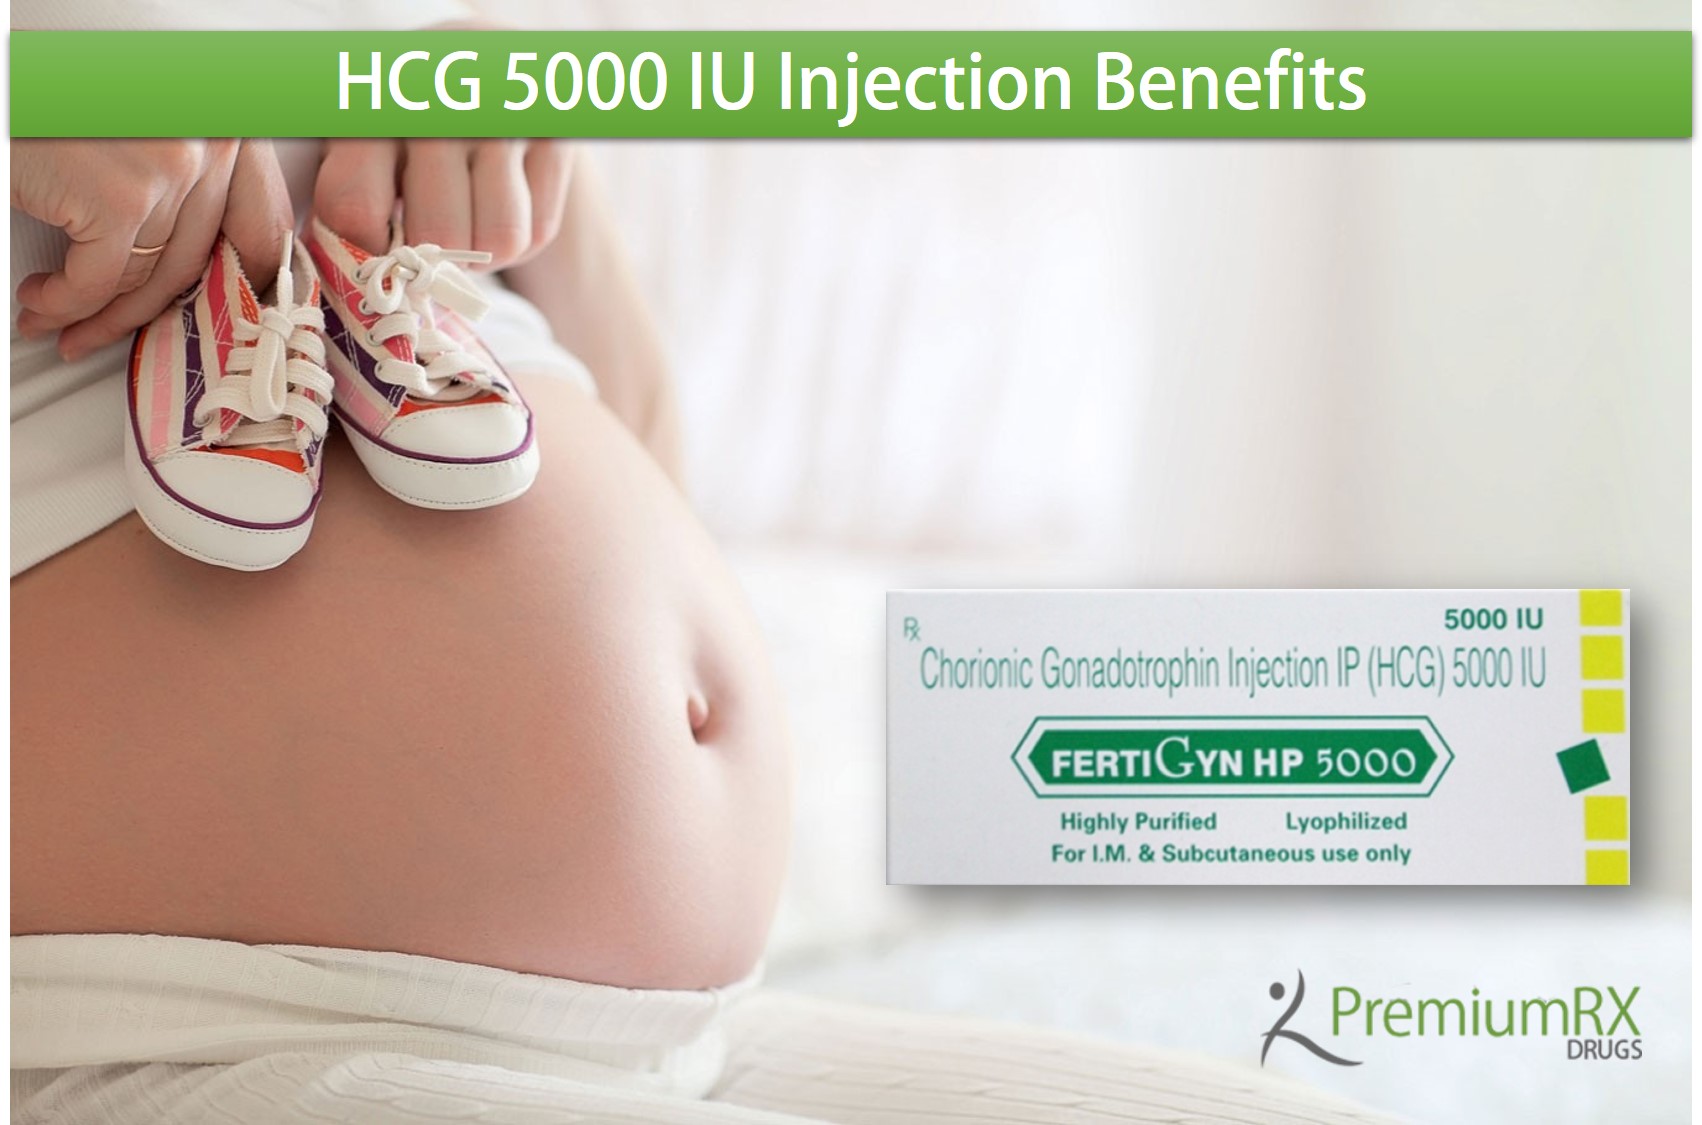 HCG Injection and Pregnancy Success